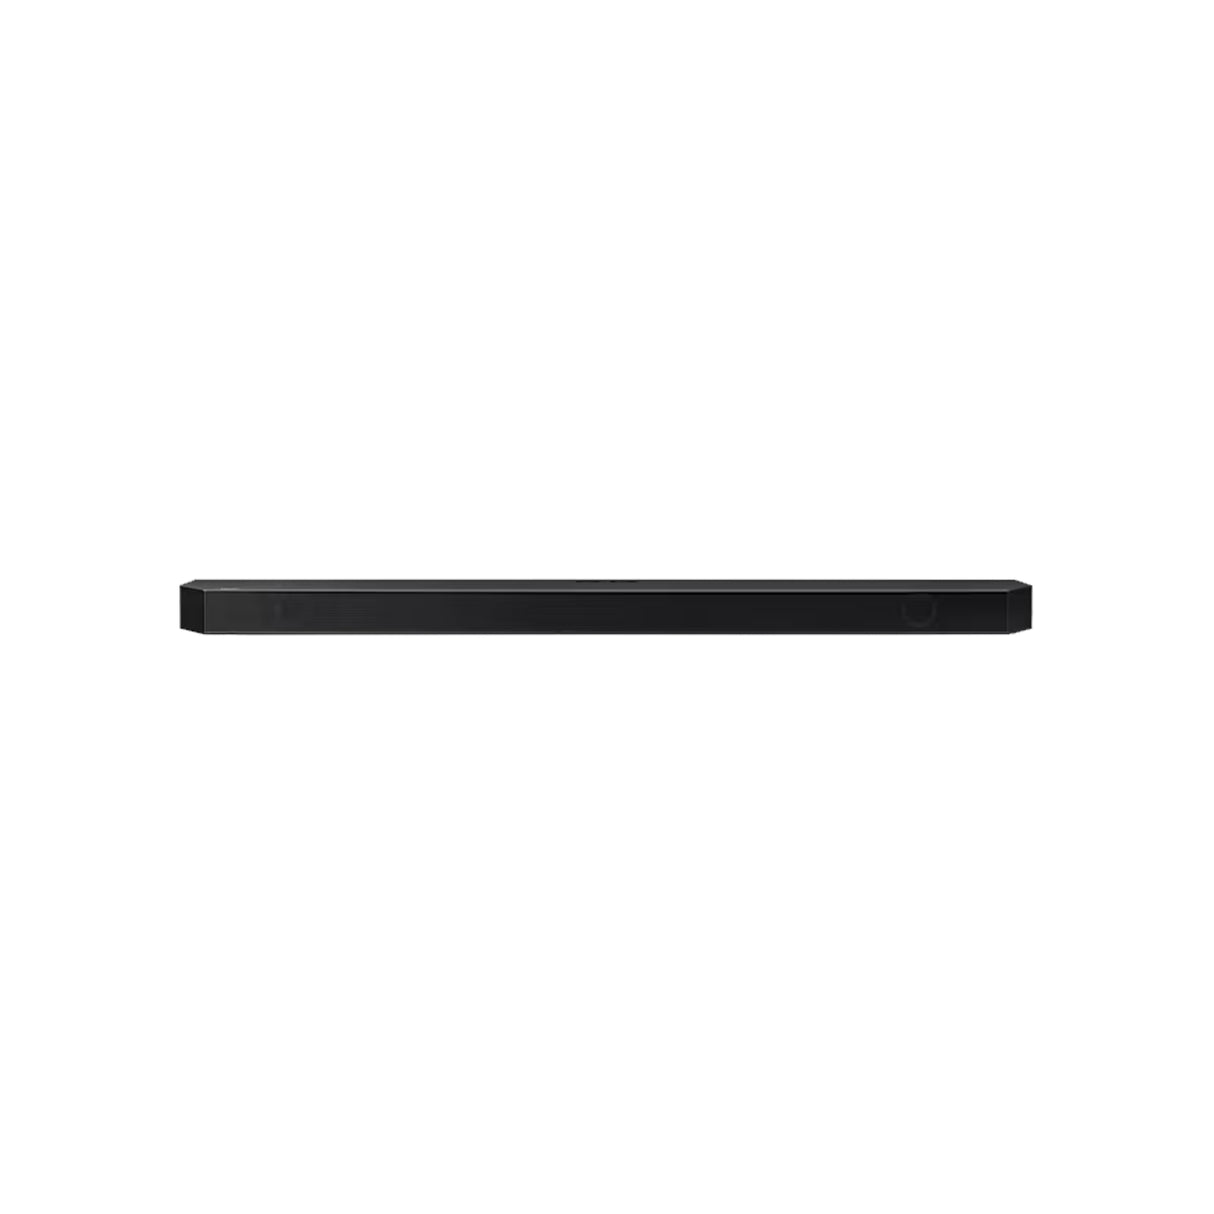 Samsung HW-Q930B/XL - 9.1.4 Channel 540W Dolby Atmos Enabled Soundbar With Wireless Surrounds & Subwoofer